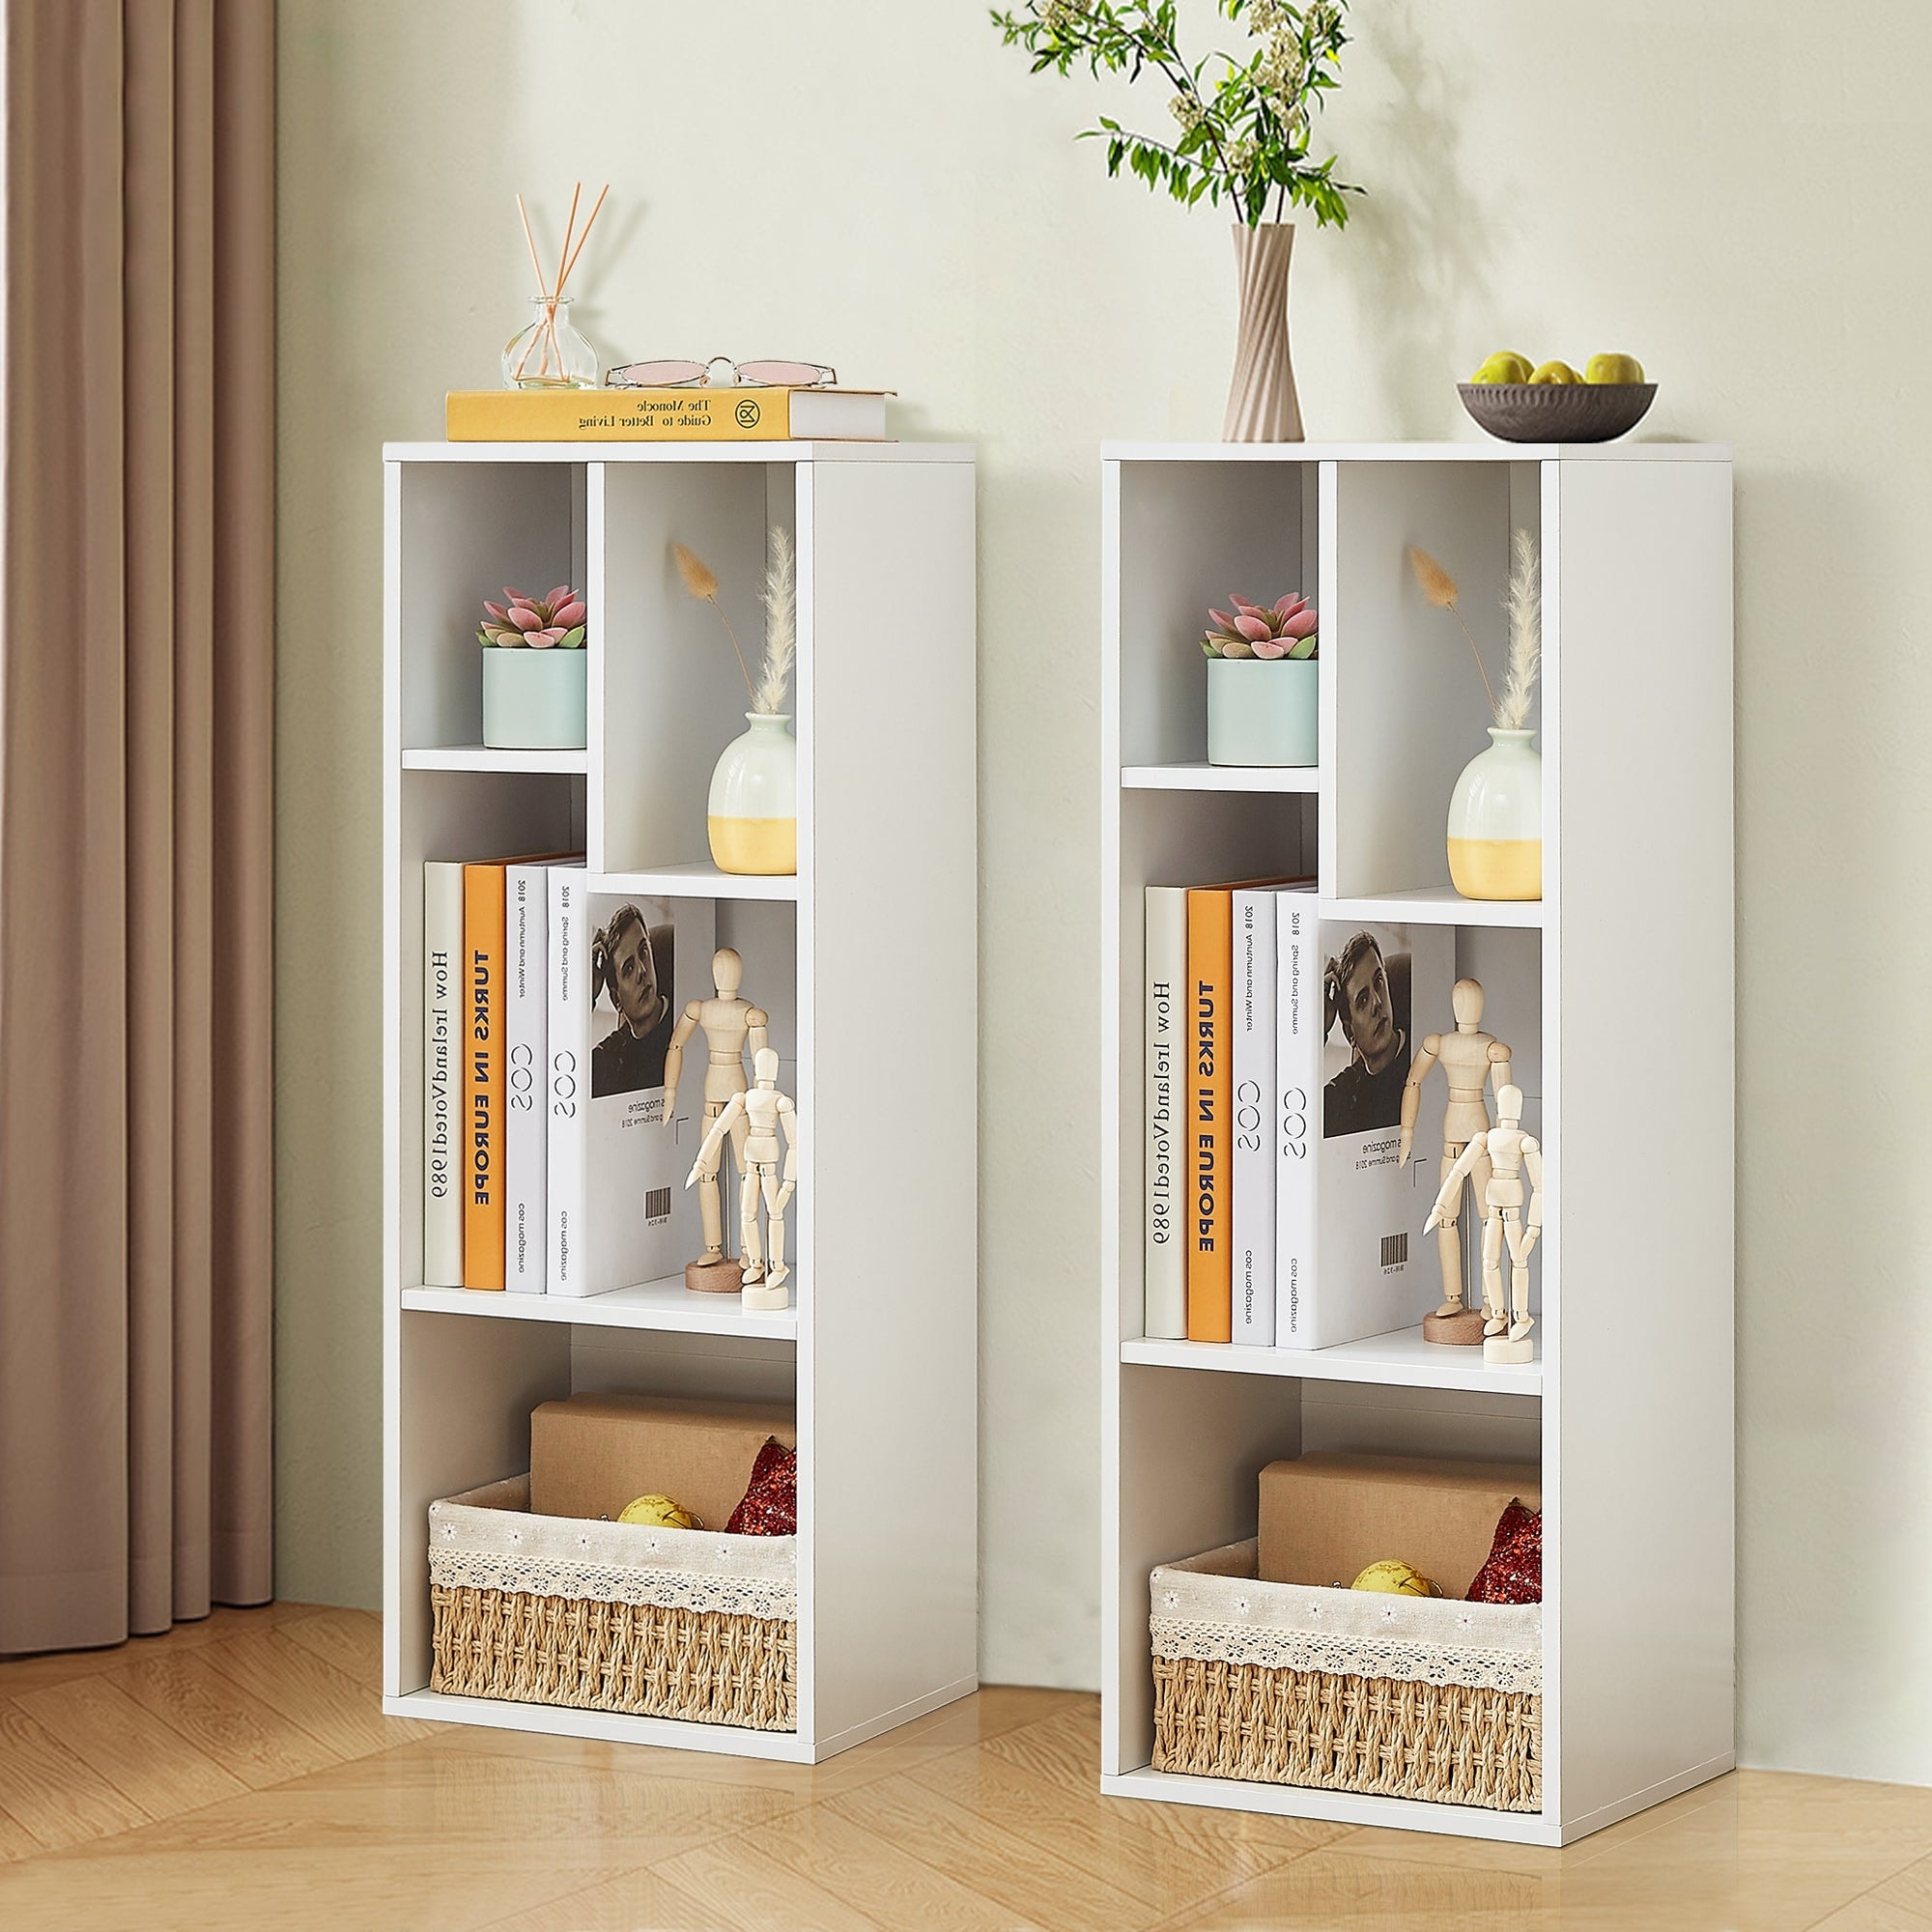 https://ak1.ostkcdn.com/images/products/is/images/direct/509c734d05c86df5cd2631aa43c78ad76aa7f1b0/Bookshelves-and-Bookcases-Set-of-2%2C-Floor-Standing-4-Tier-Display-Storage-Shelves%2C-Tall-Bookcase-Shelf-Storage-Organizer.jpg